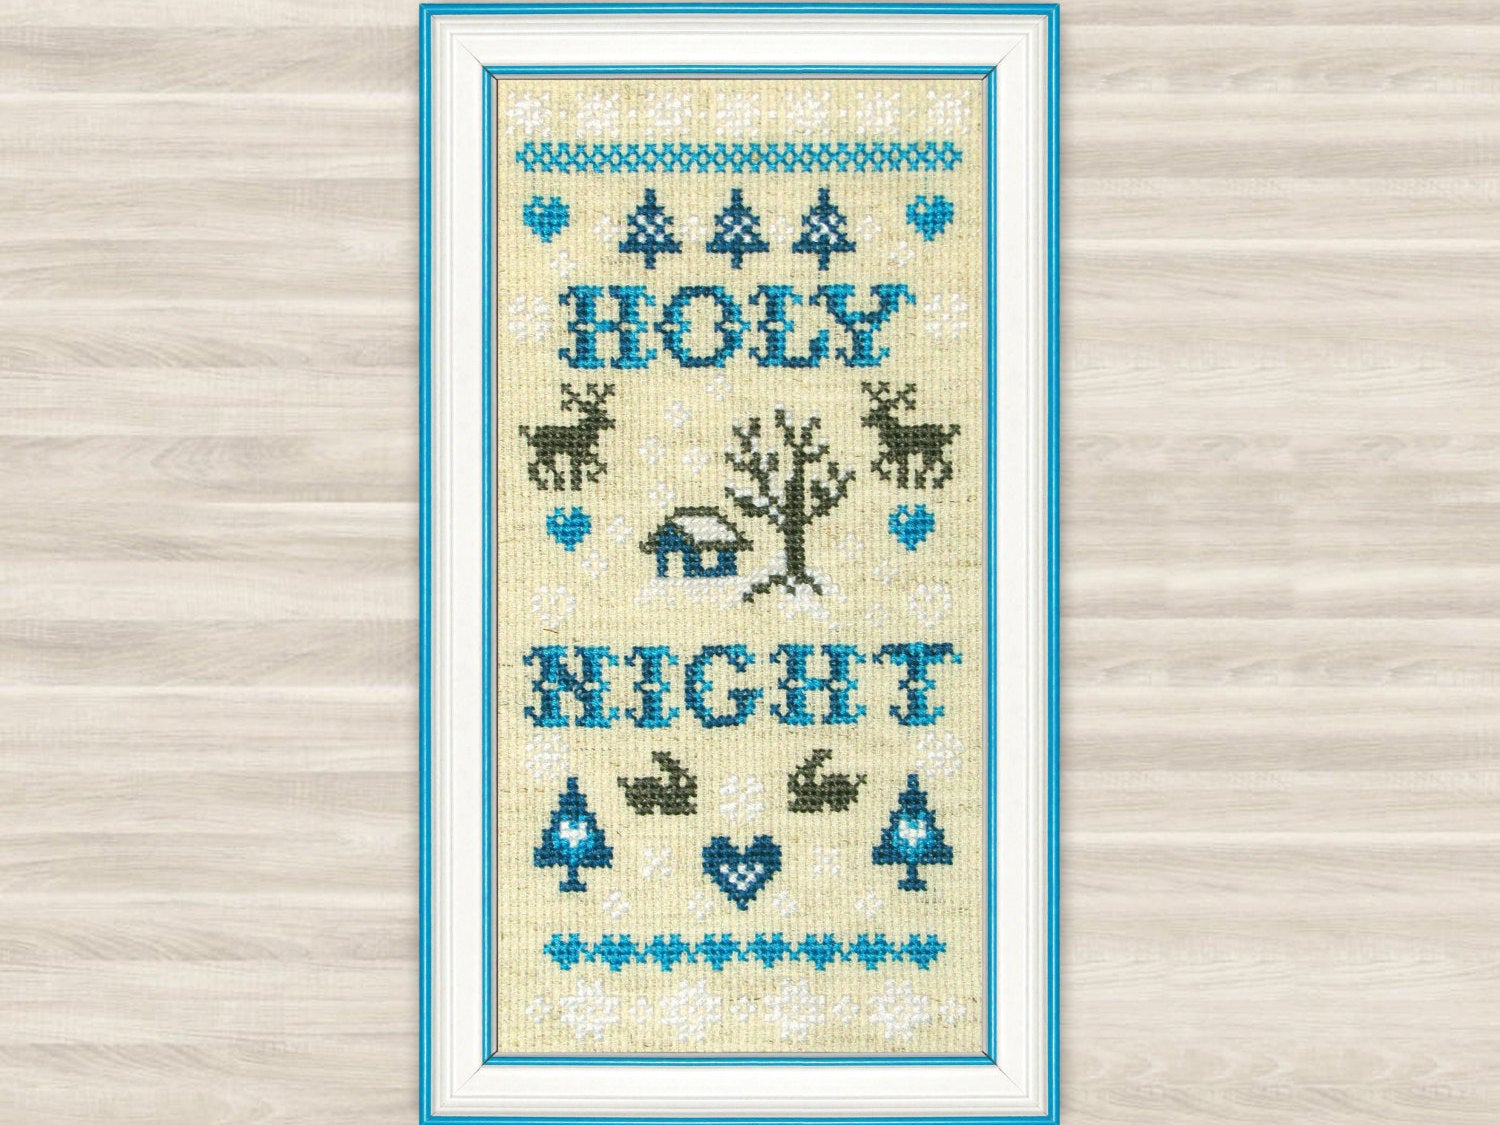 Embroidery Sampler Patterns Free Buy 2 Get 1 Free Holy Night Cross Stitch Pattern Pdf Christmas Deer Home Decor Christmas Gift Winter Sampler Snow Embroidery Blue Primitive